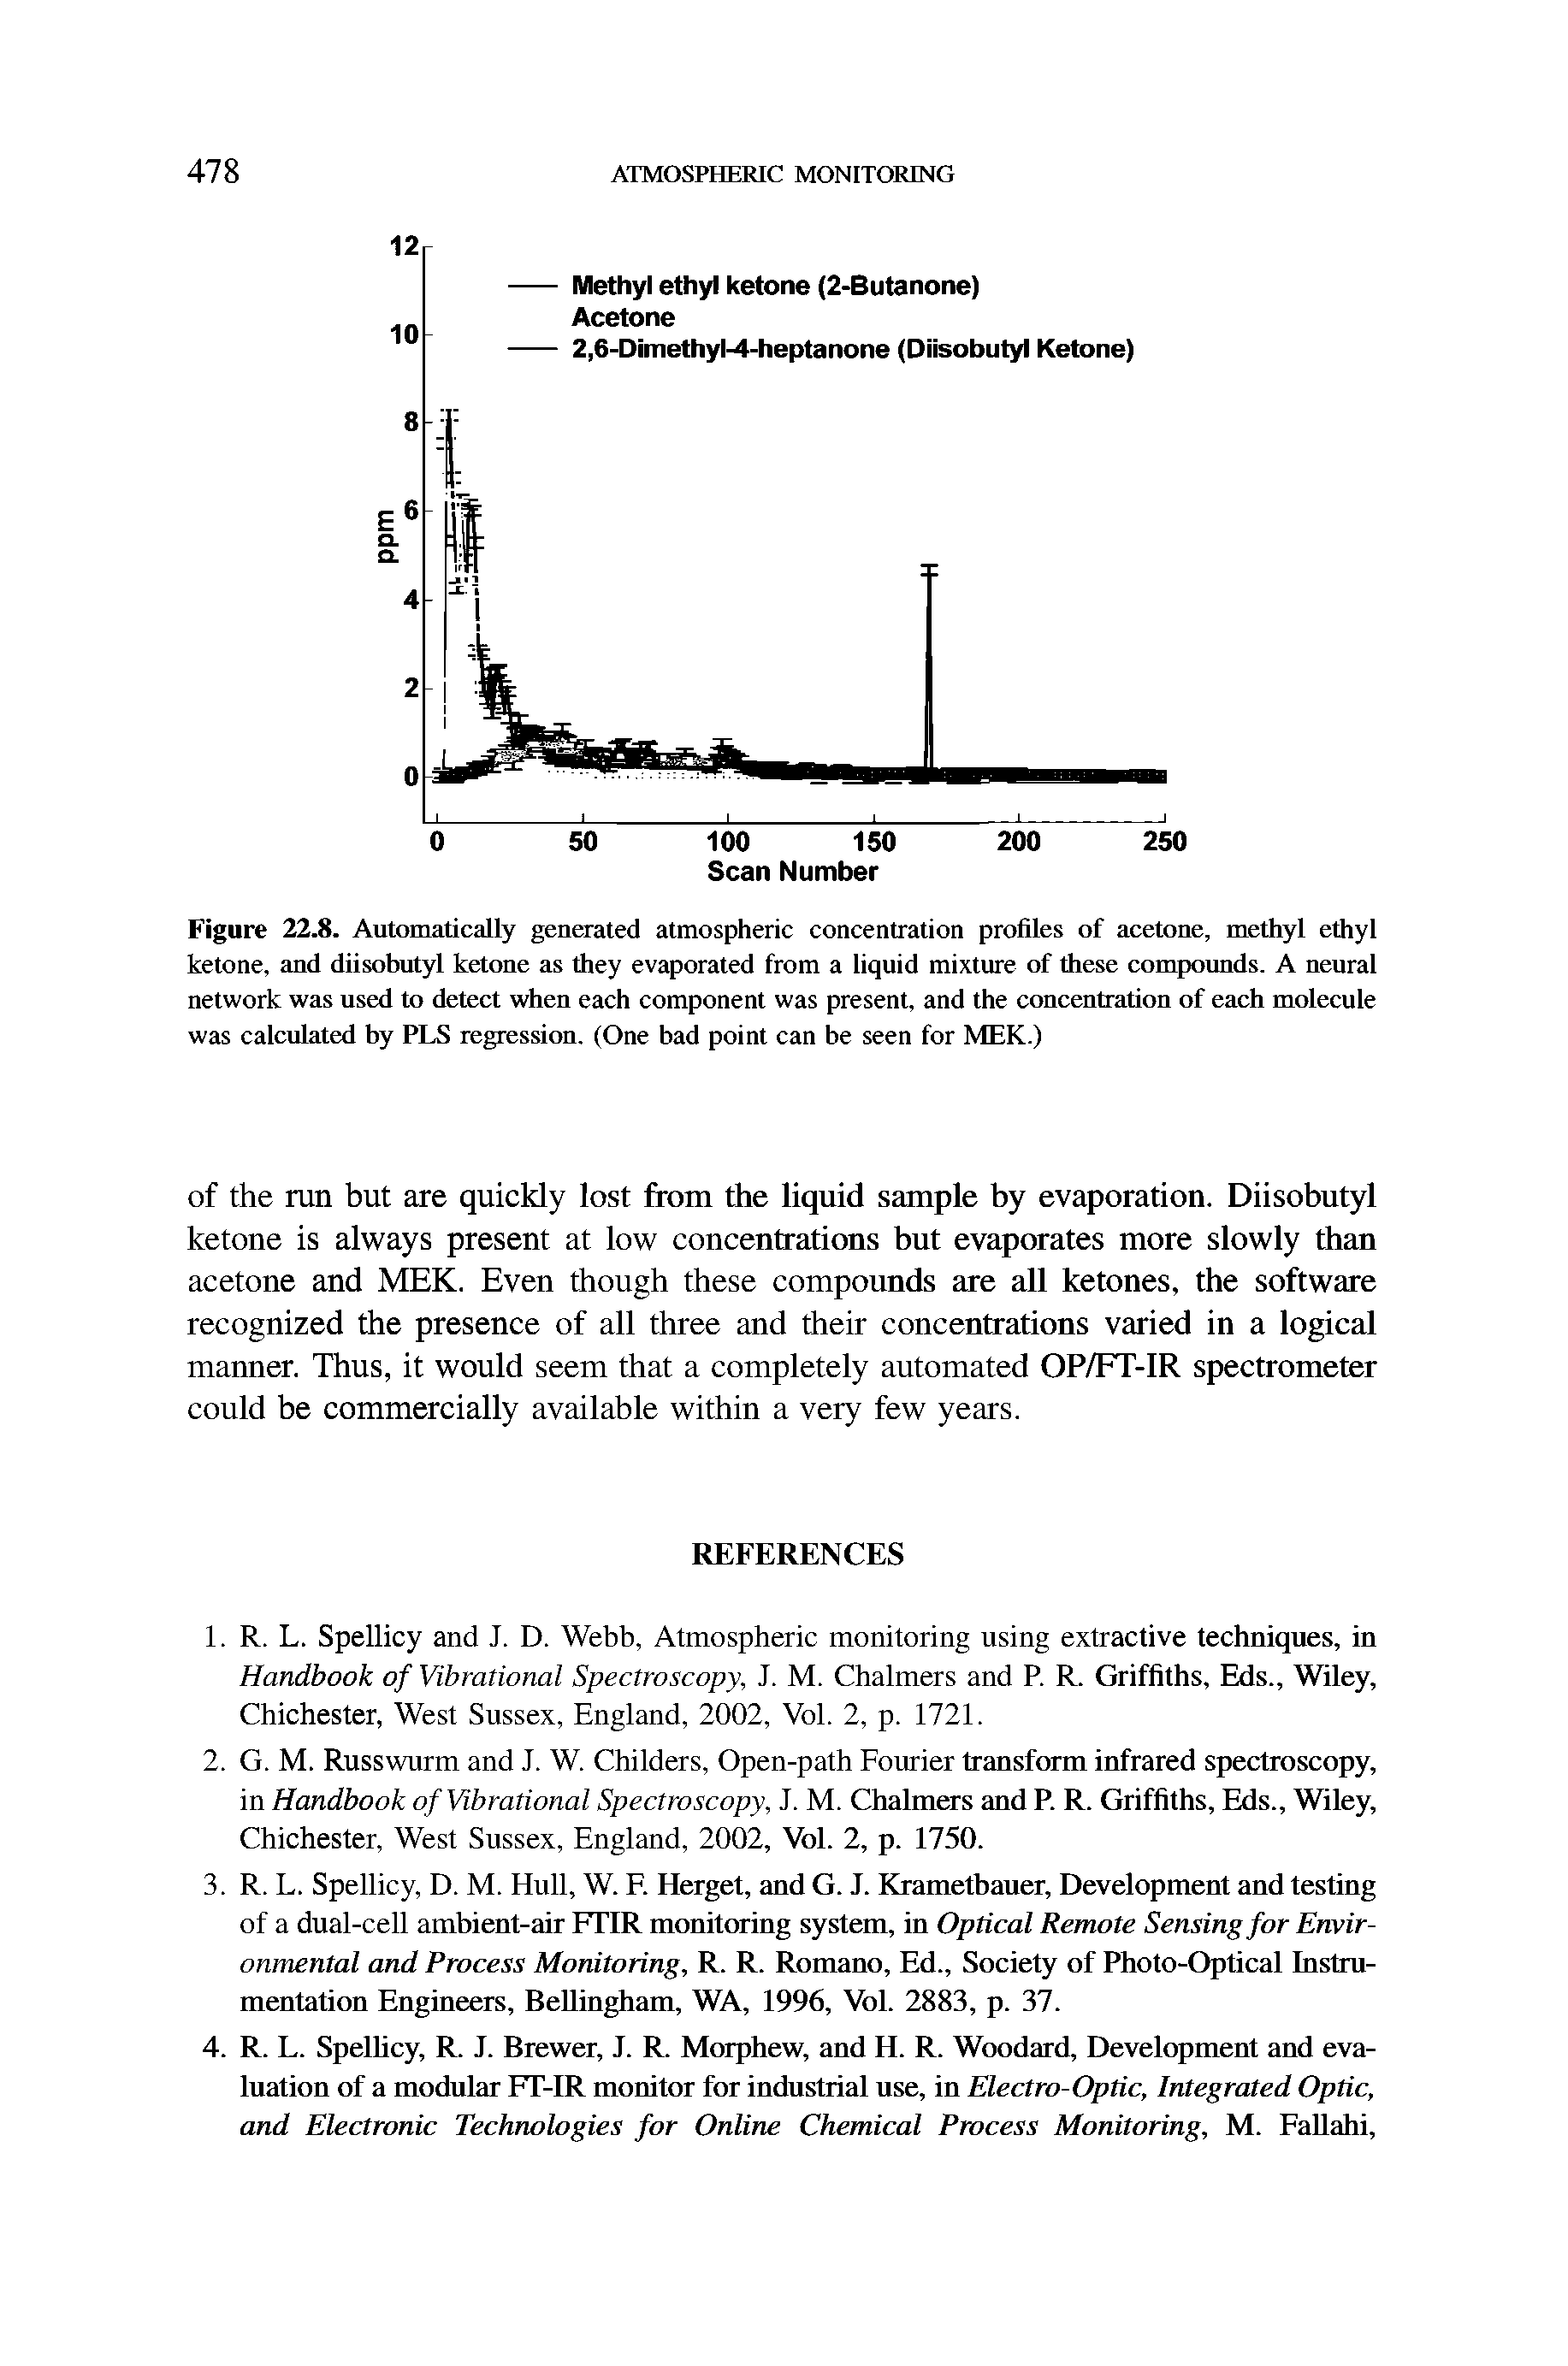 Figure 22. Automatically generated atmospheric concentration profiles of acetone, methyl ethyl ketone, and diisobutyl ketone as they evaporated from a liquid mixture of these compounds. A neural network was used to detect when each component was present, and the concentration of each molecule was calculated by PLS regression. (One bad point can be seen for MEK.)...